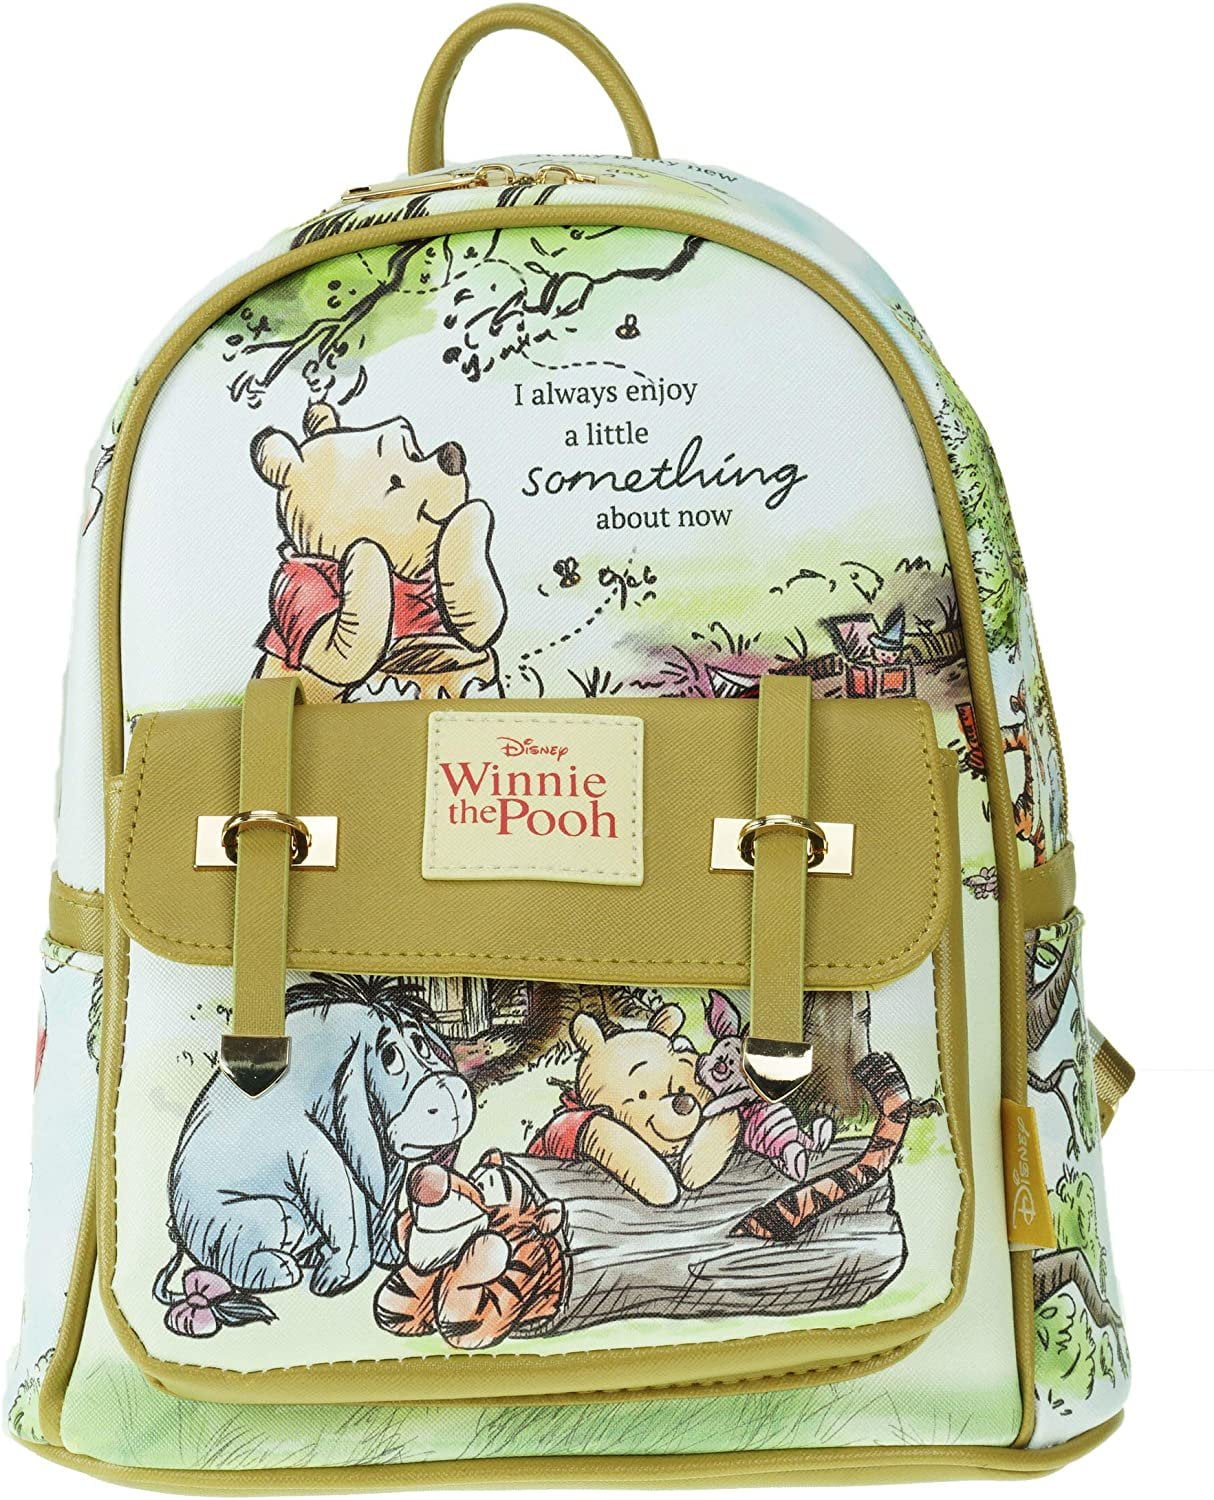 Winnie The Pooh 11 Faux Leather Mini Backpack - A20762 